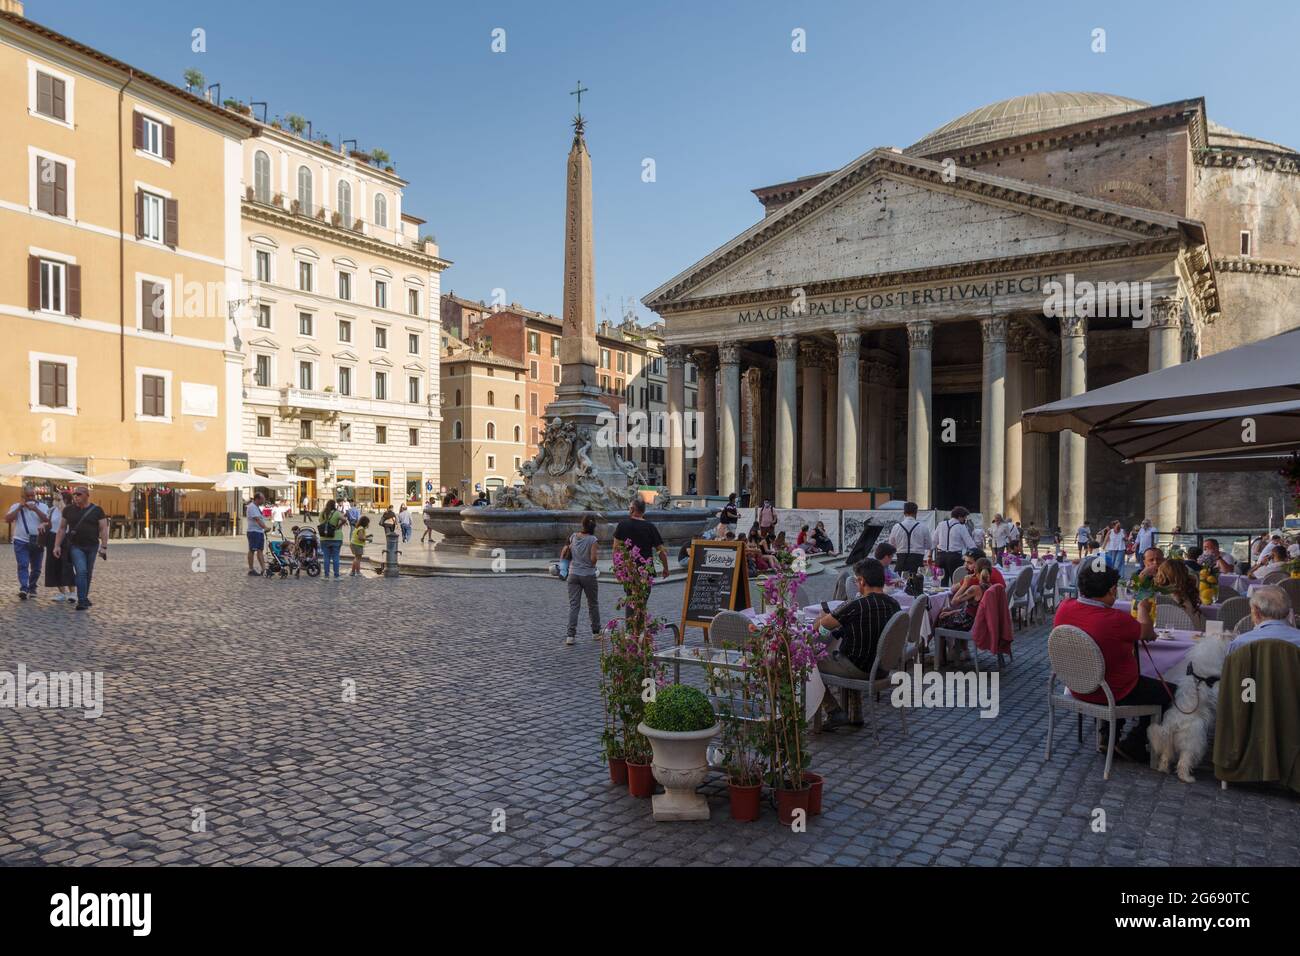 Pantheon square also known as Piazza della Rotonda with the Fountain and obelisk. Tourists in outside restaurant Stock Photo